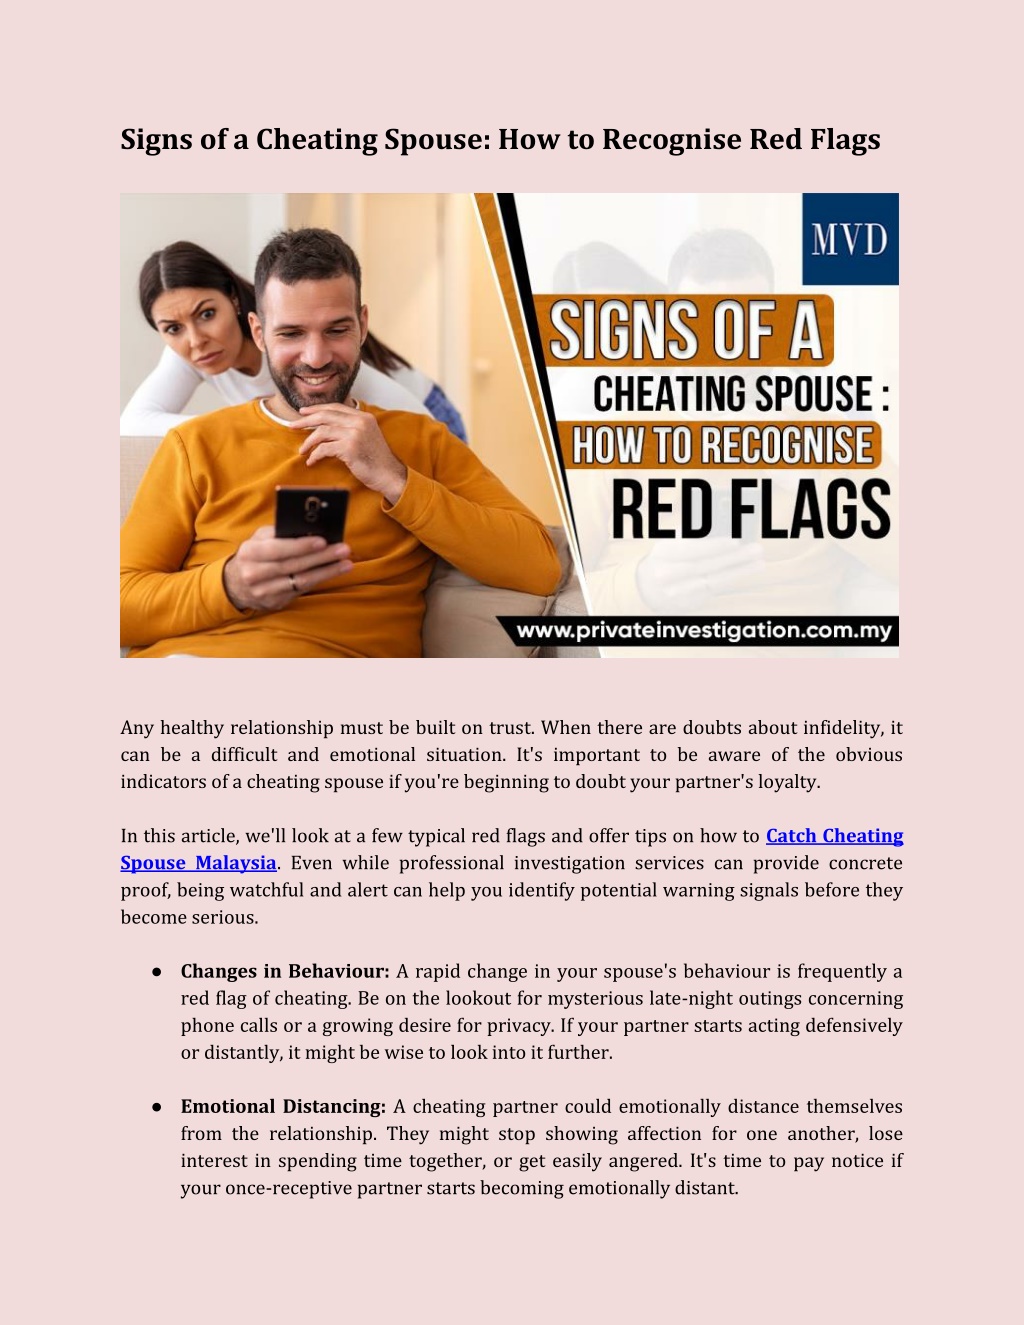 Ppt Signs Of A Cheating Spouse How To Recognise Red Flags Powerpoint Presentation Id12191981 